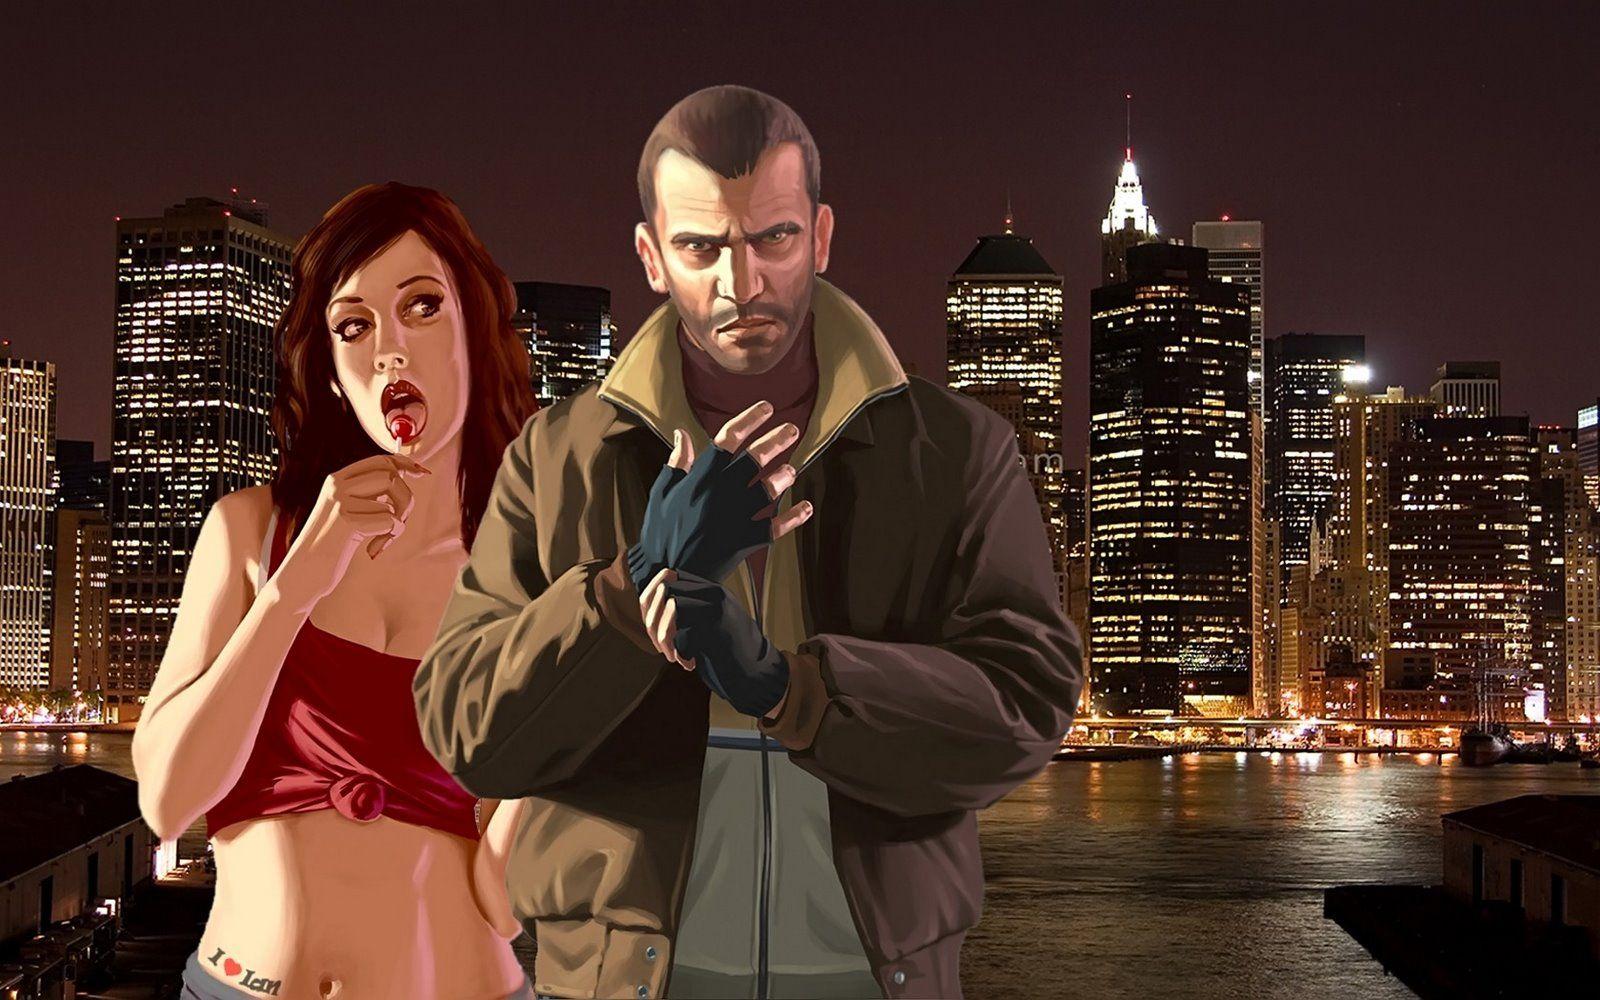 Gta Iv Wallpapers Top Free Gta Iv Backgrounds Wallpaperaccess